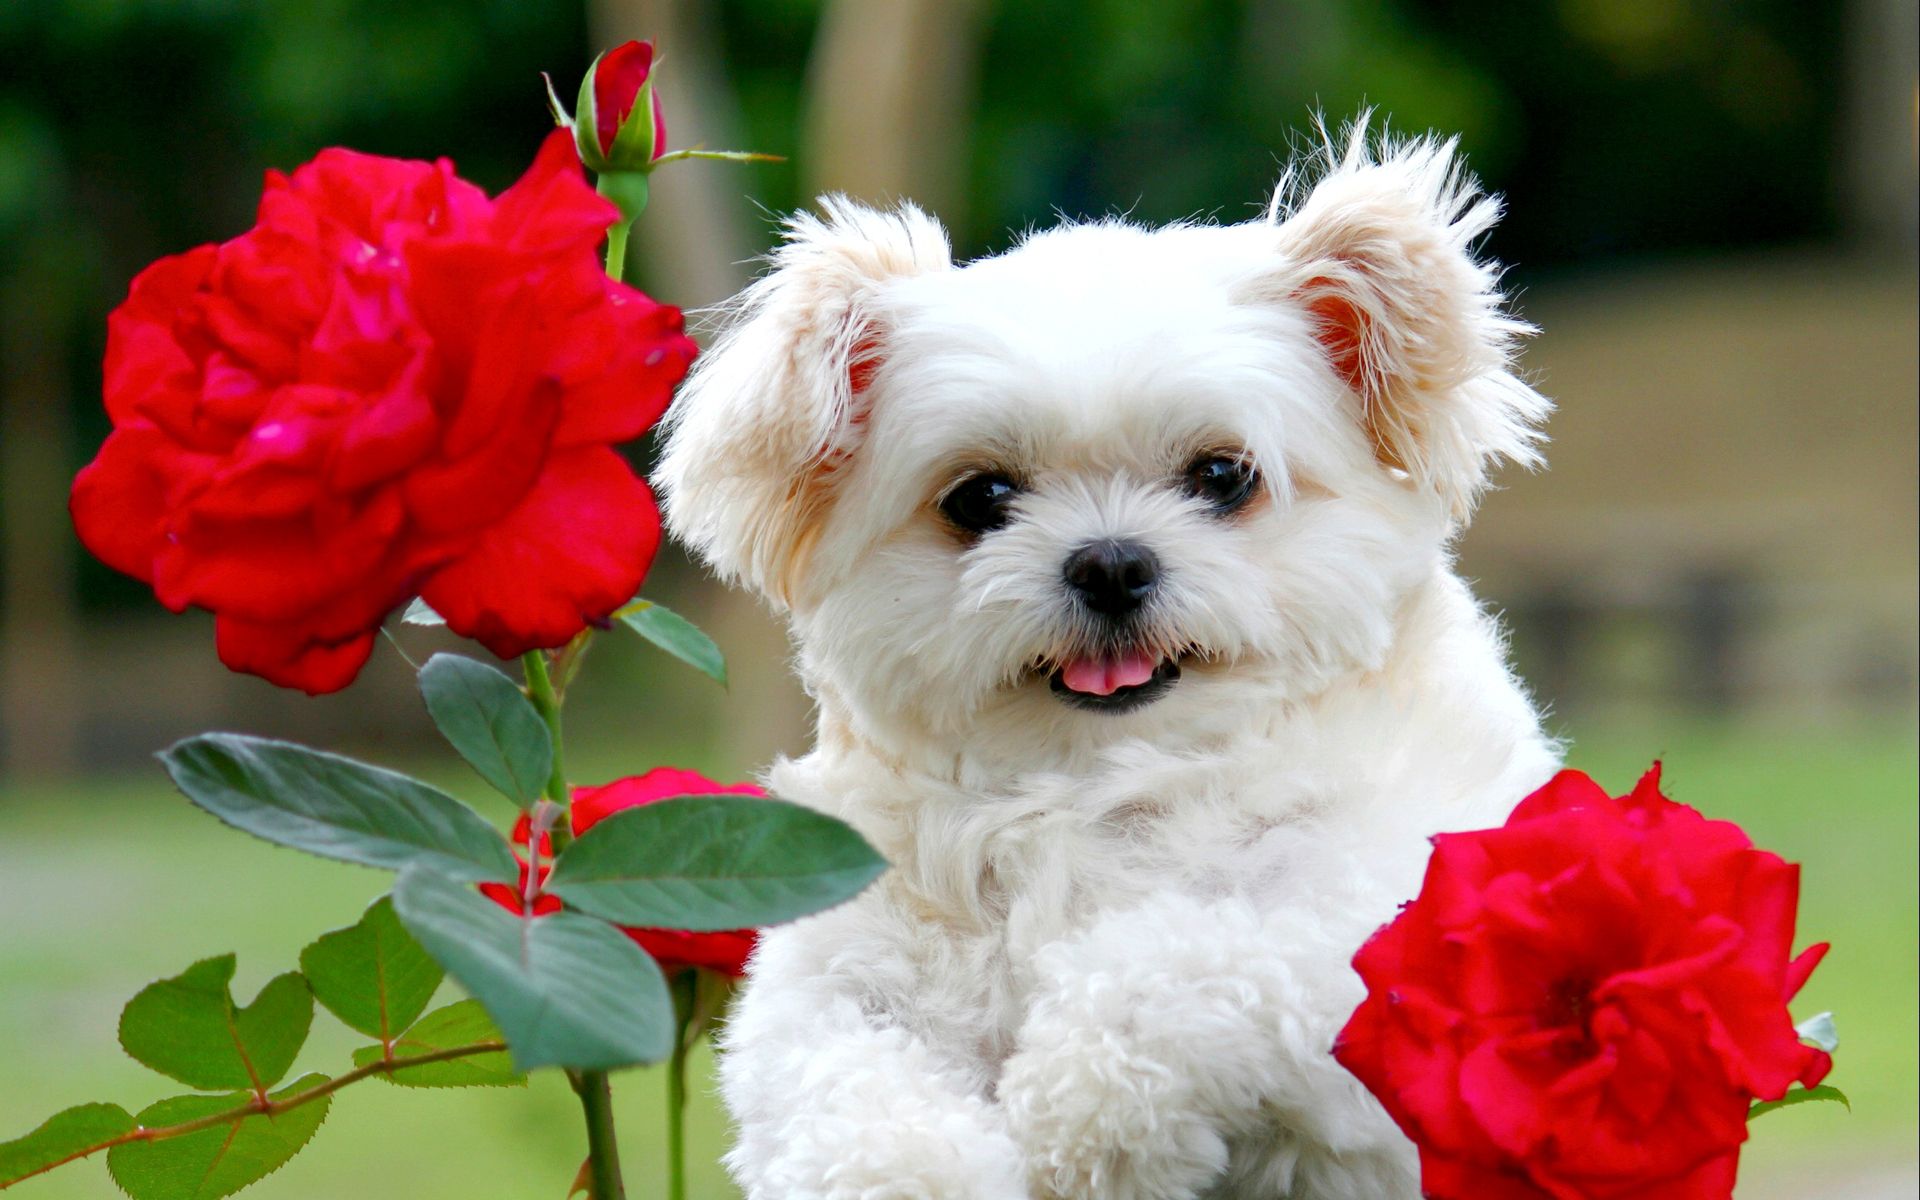 Cute Puppies Wallpaper & Background Beautiful Best Available For Download Cute Puppies Photo Free On Zicxa.com Image